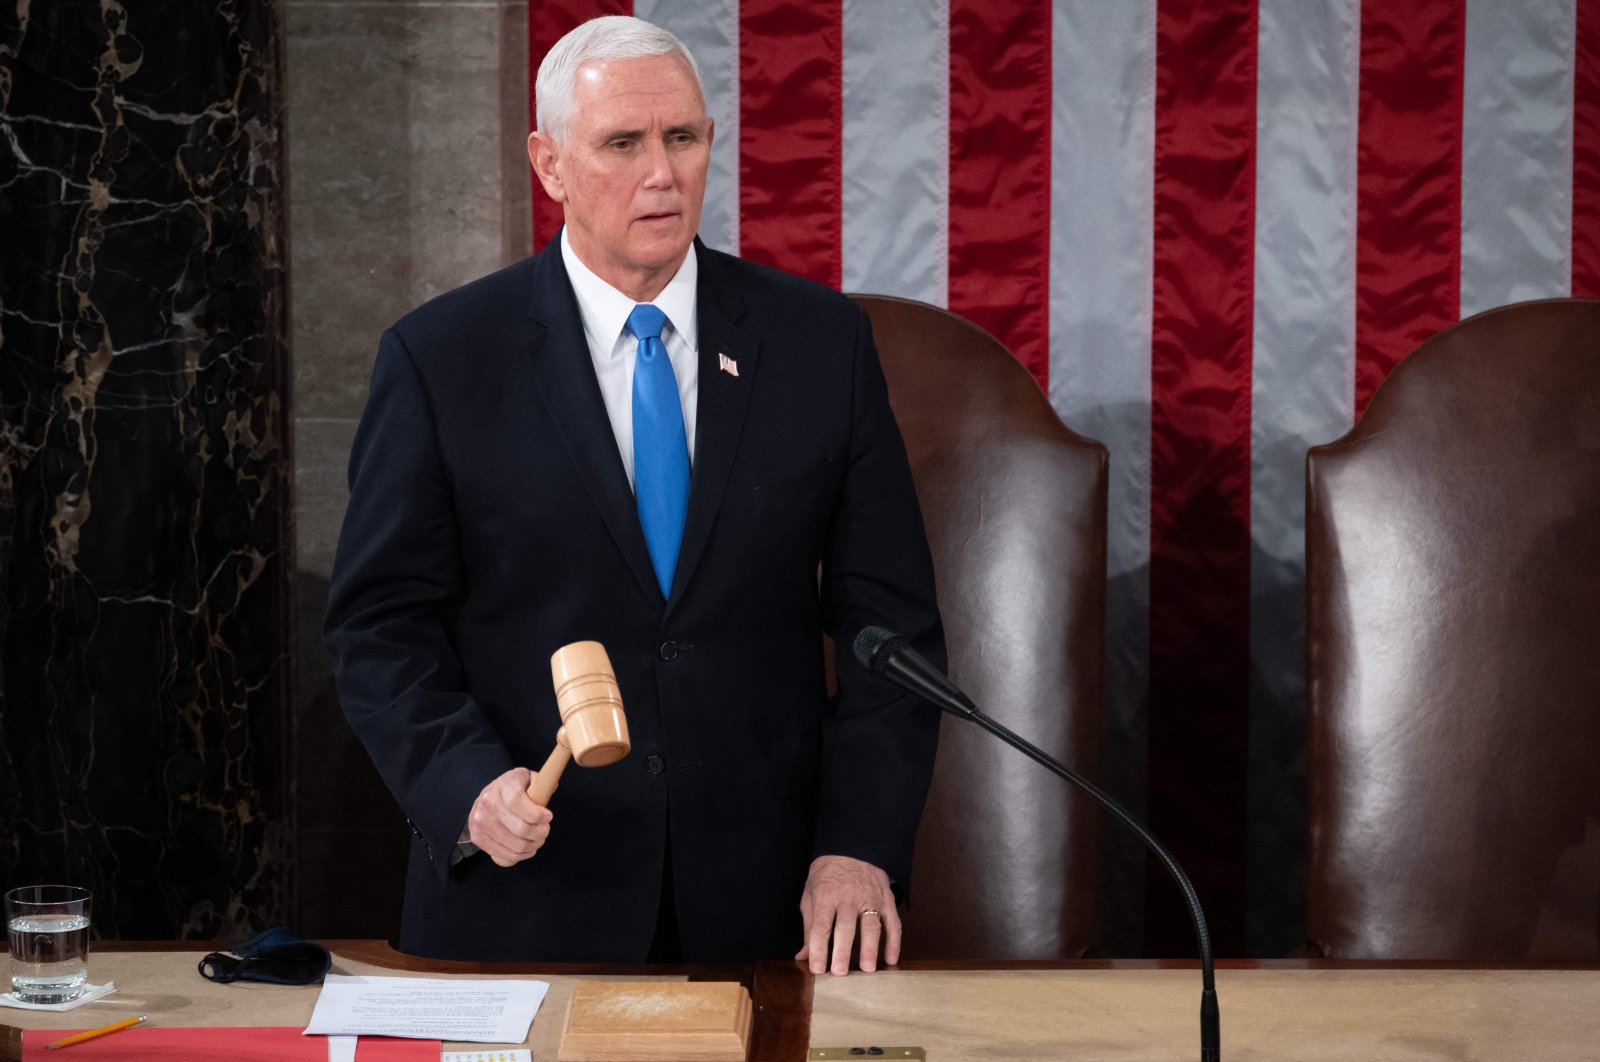 US Vice President Mike Pence presides over a joint session of Congress to certify the 2020 Electoral College results, Washington, US., Jan. 6, 2021. (AFP Photo)